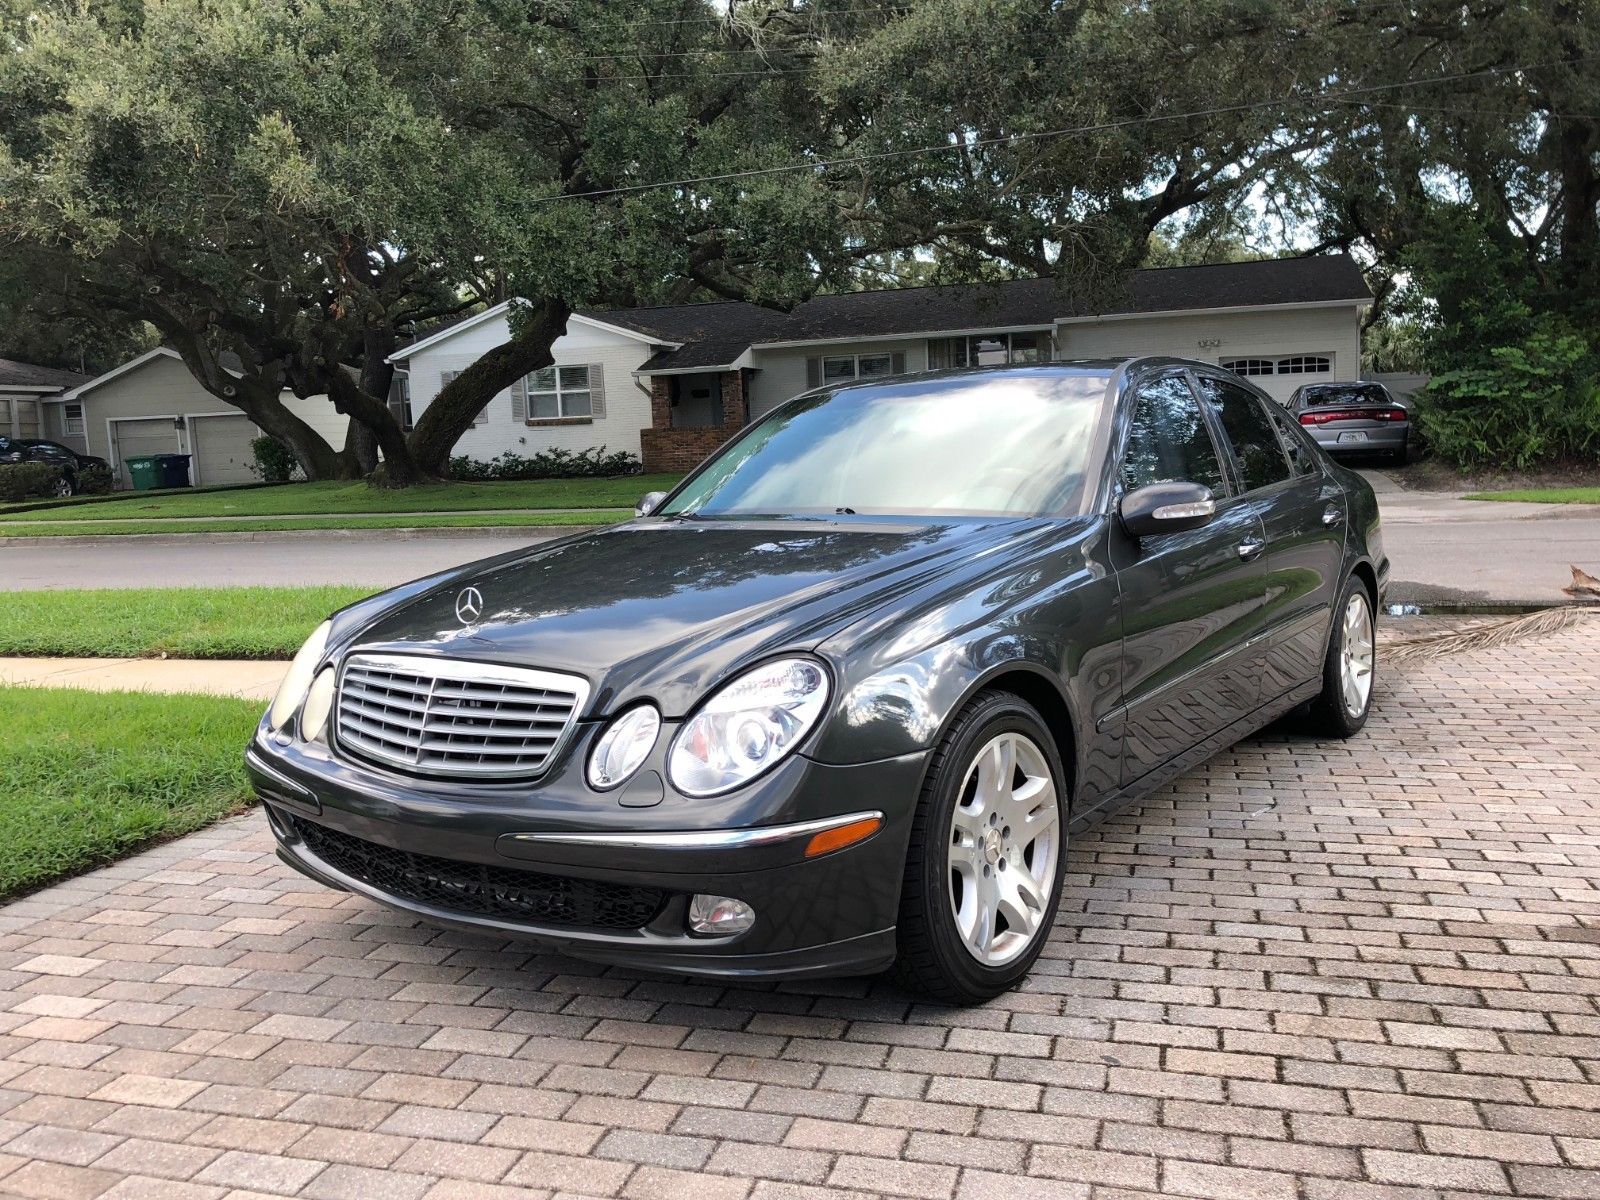 2003 Mercedes Benz E Class Used 2003 Mercedes E500 2017 2018 Is In Stock And For Sale 24carshop Com